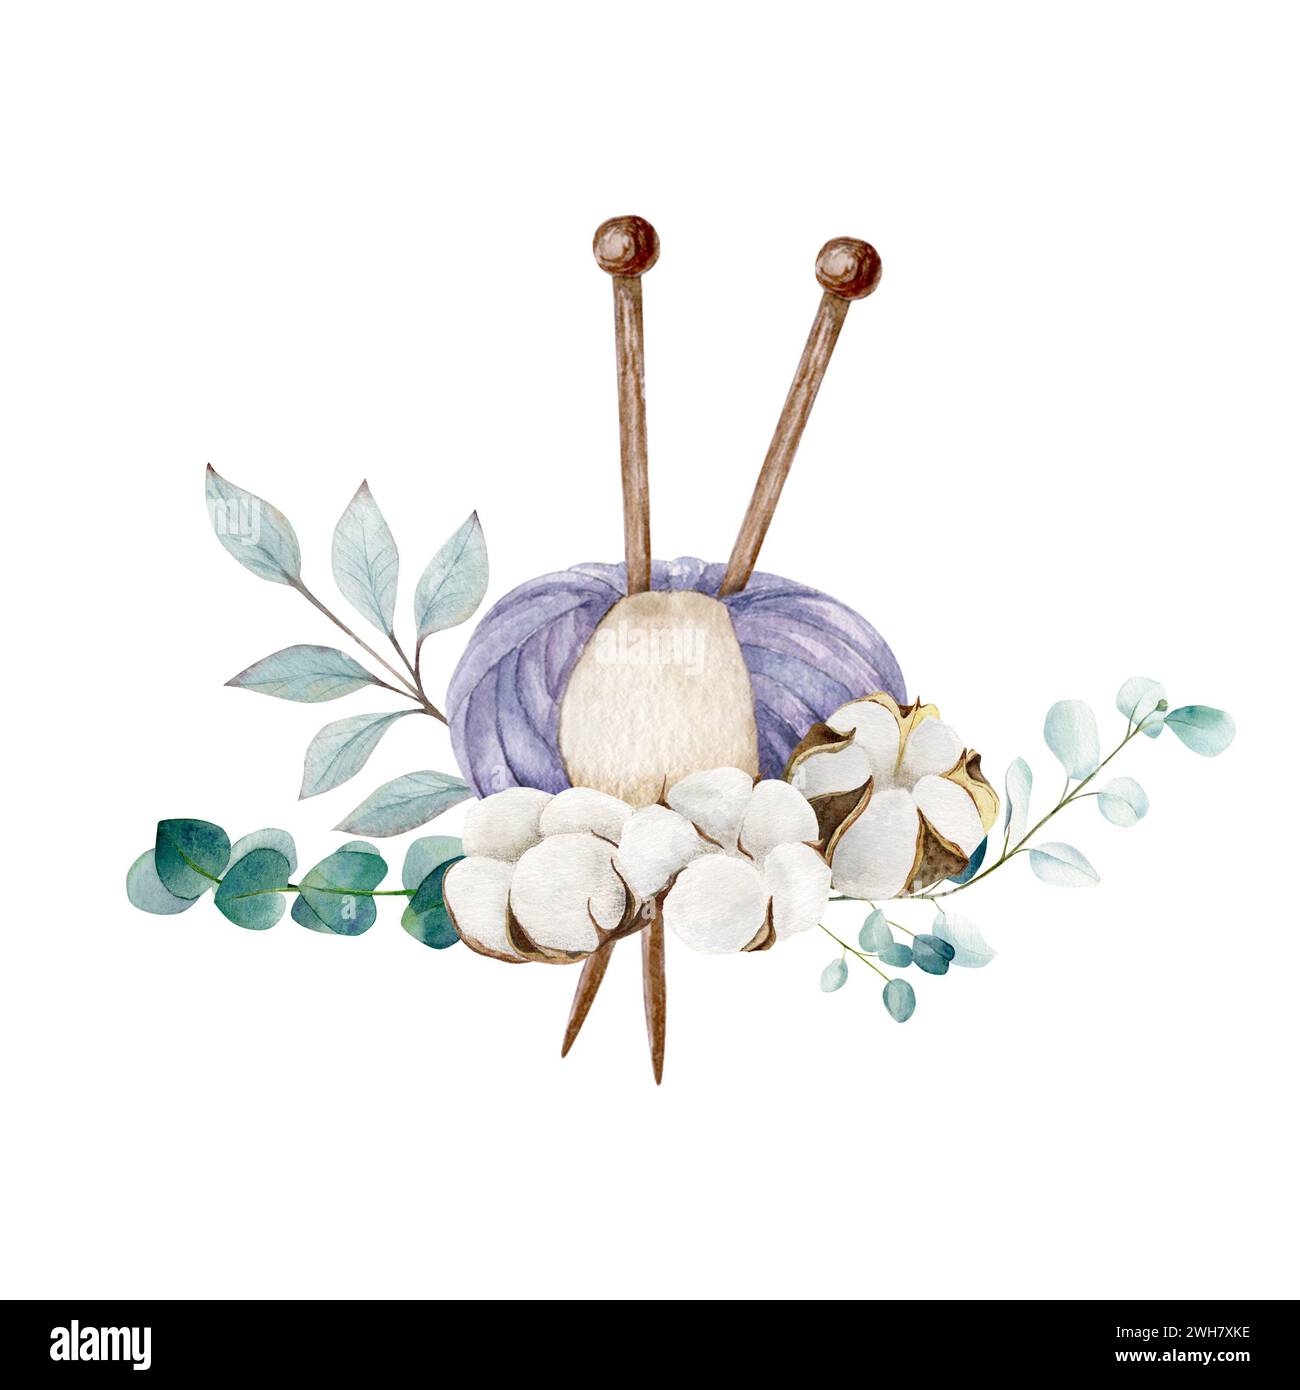 Knitting ball of yarn and single pointed needles with cotton bolls and eucalyptus branches, hand draw, watercolor illustration Stock Photo